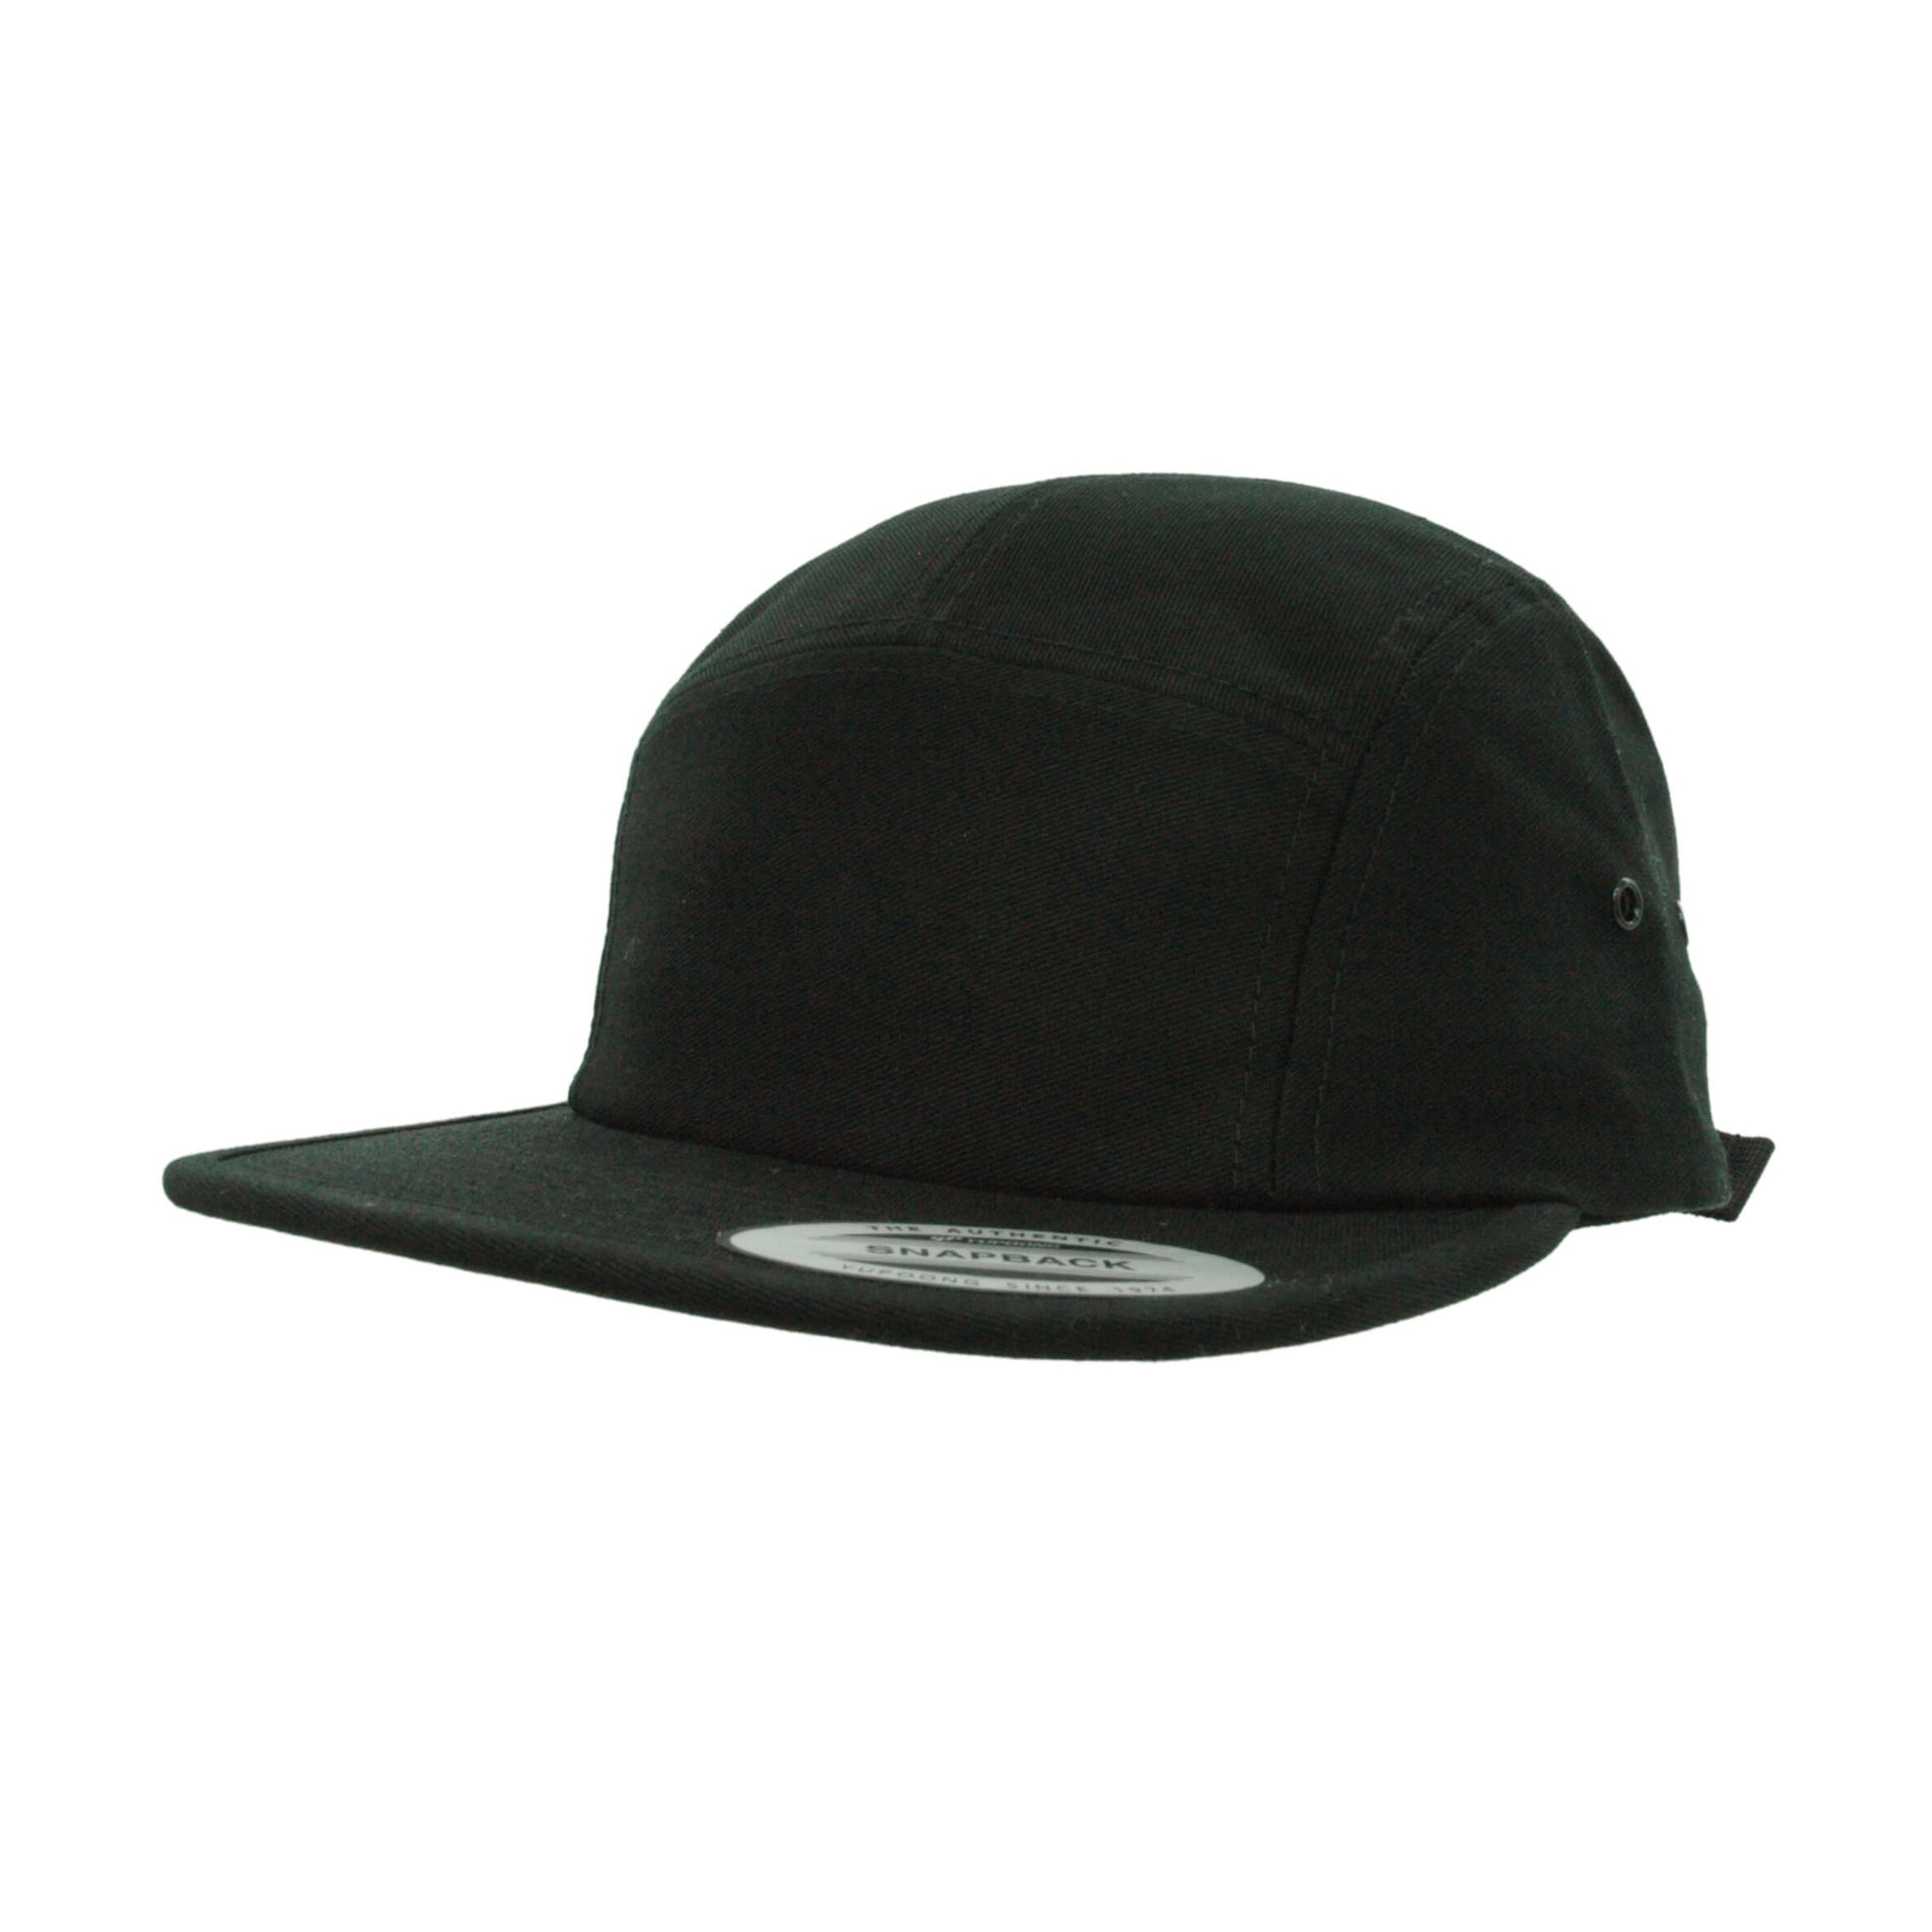 Black Five Panel Jockey Cap with an added Adjustable Clip